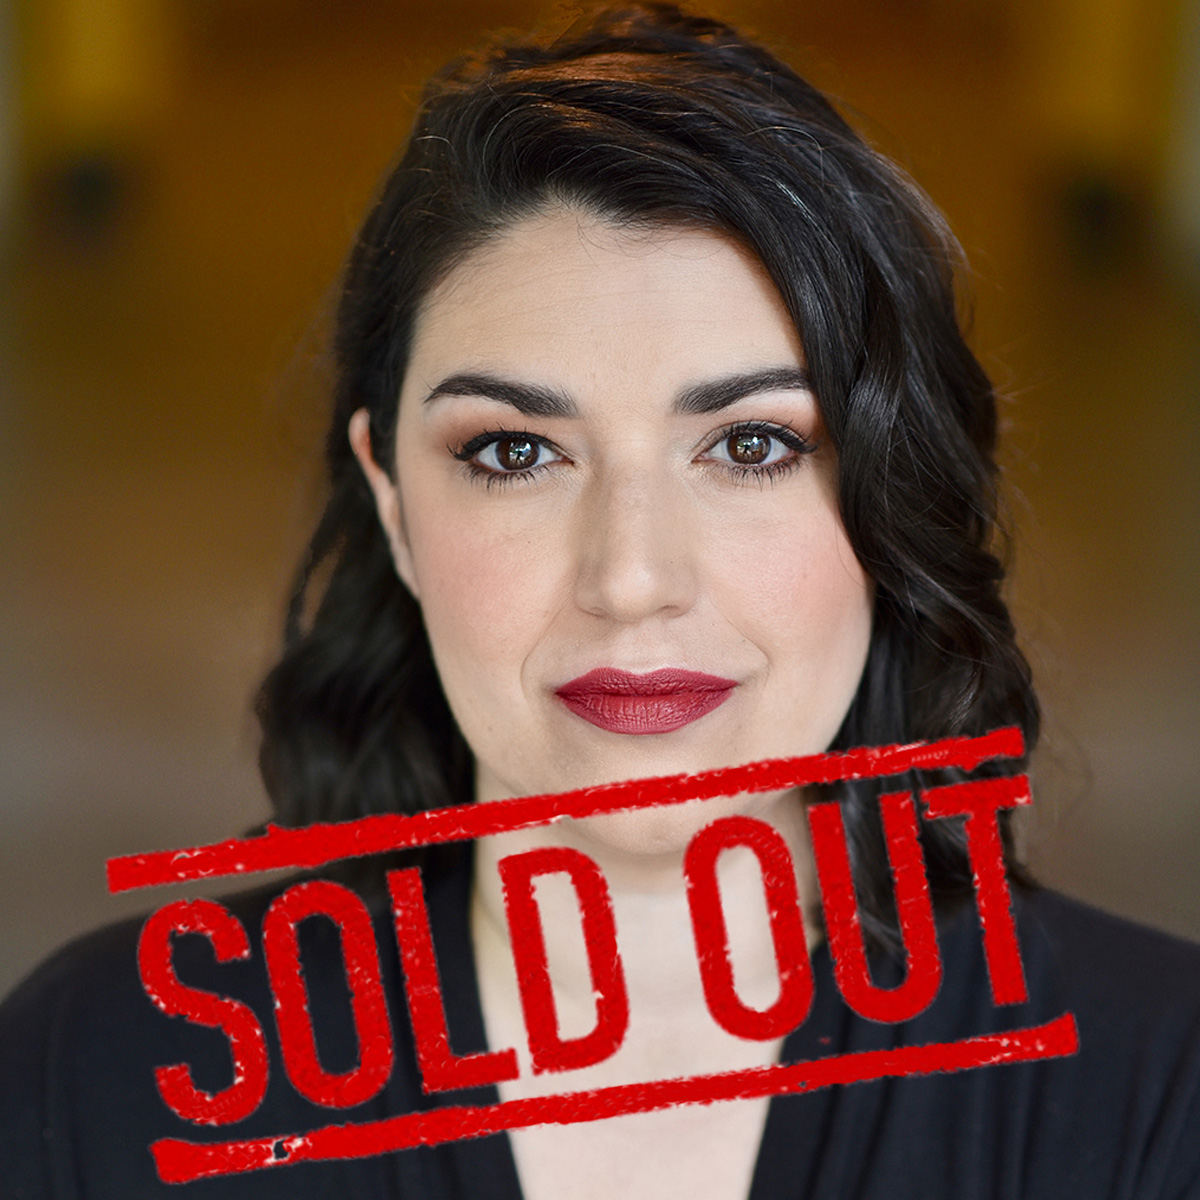 Eliana M-Sold Out Poster